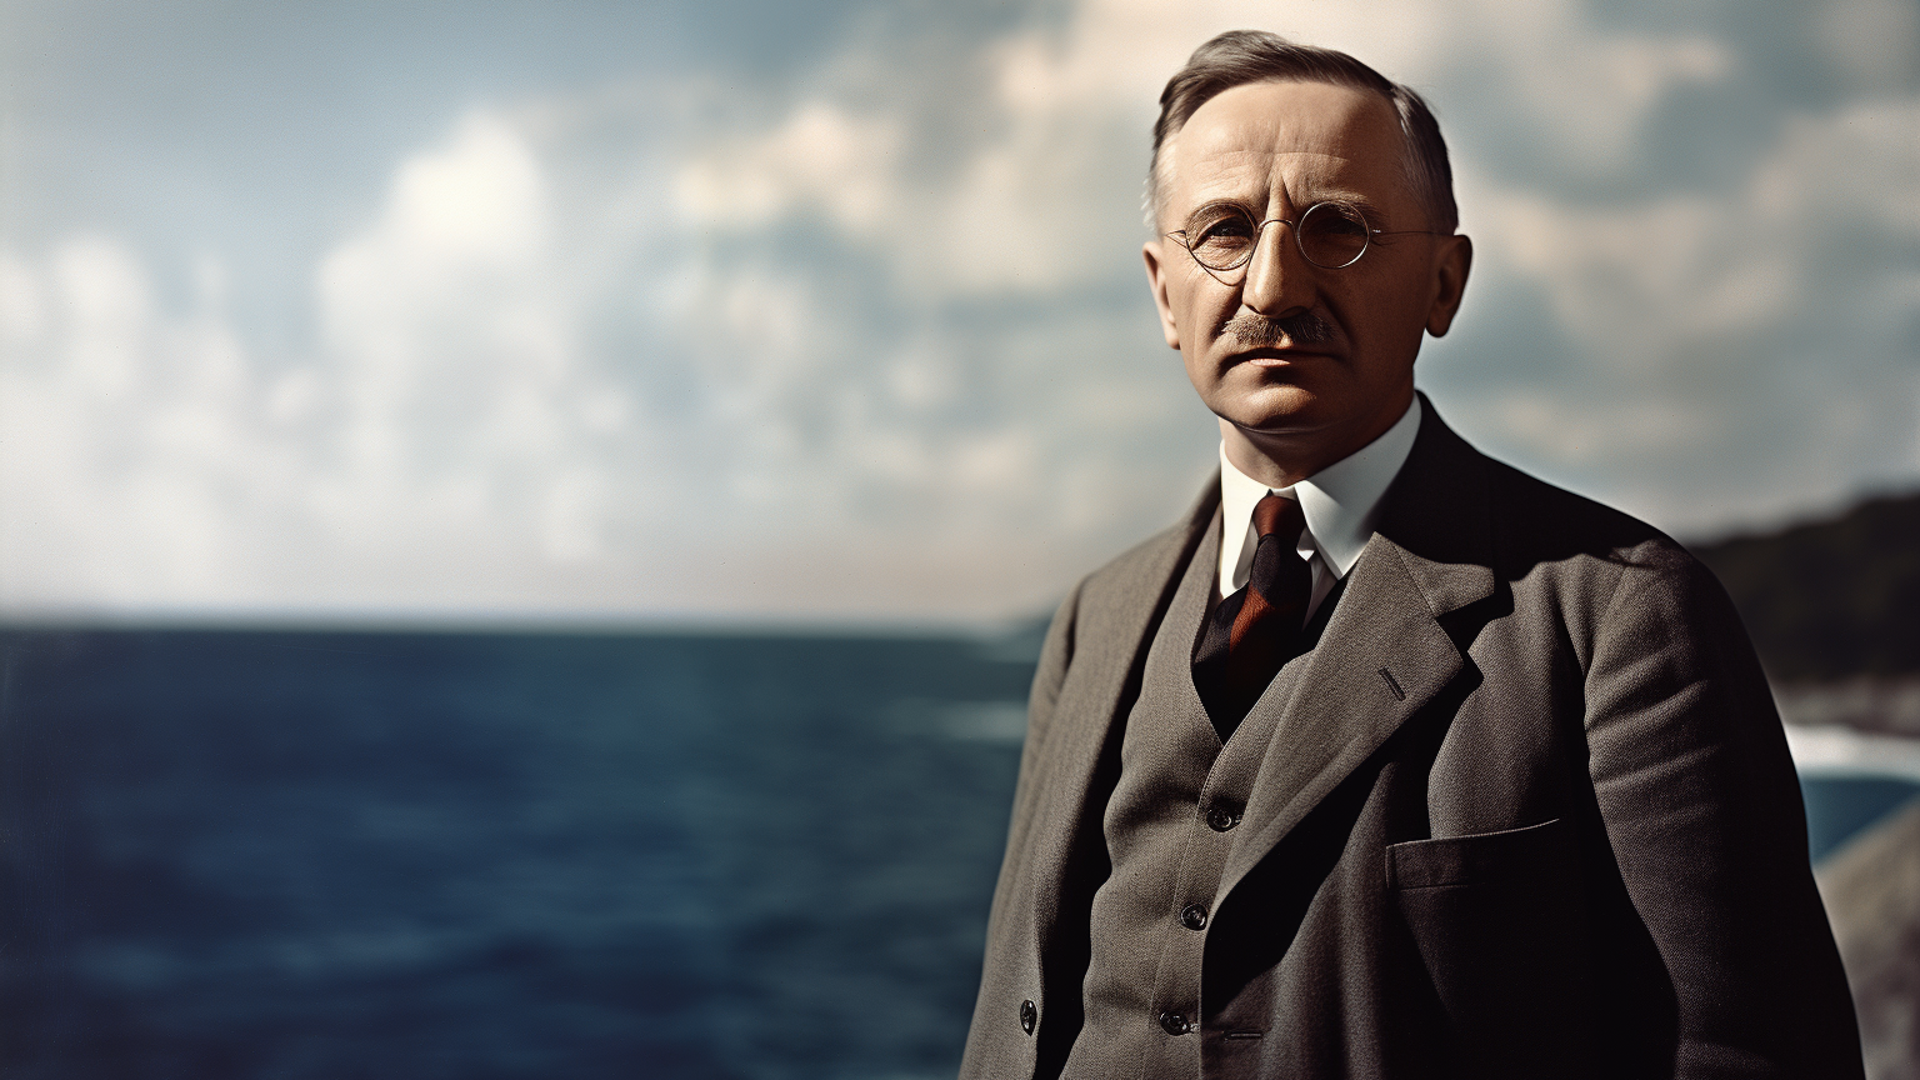 SFL believes that politics is a reflection of the ideals of society. For Hayek, more than changing politics, we need to change the ideas that dominate culture. That's how we manage to make changes.